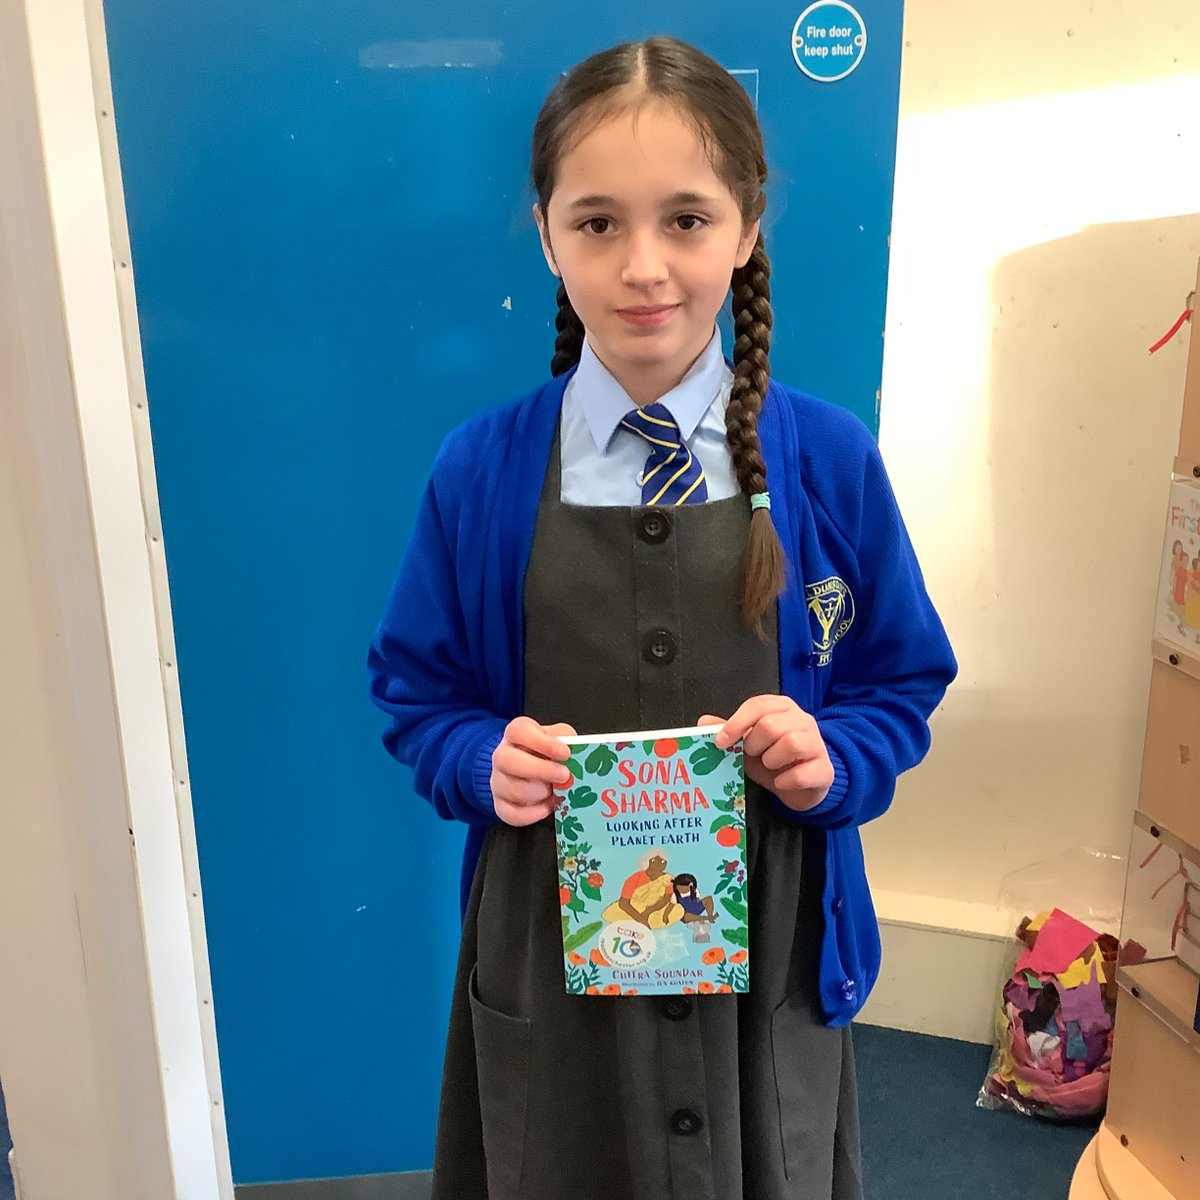 St Dunstan's Recommend Reads. Renae in Year 5 said 'I have just finished reading Looking After Earth by Sona Sharma and I thought it was very good.'